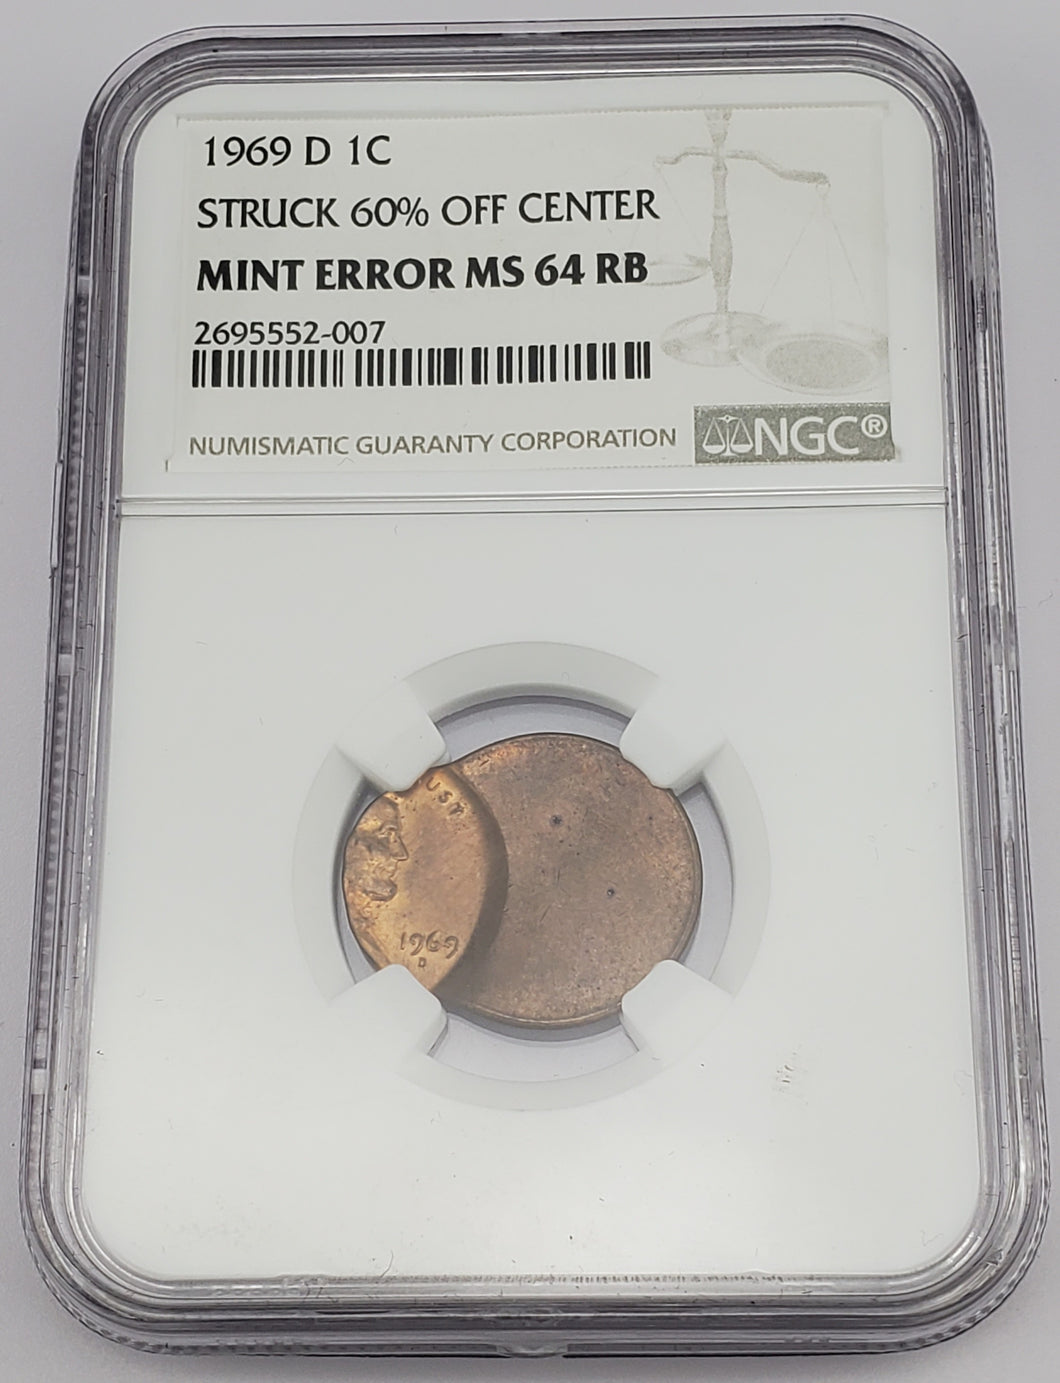 1969 D Lincoln Penny 1c NGC Mint Error MS 64 RB Struck 60% Off Center